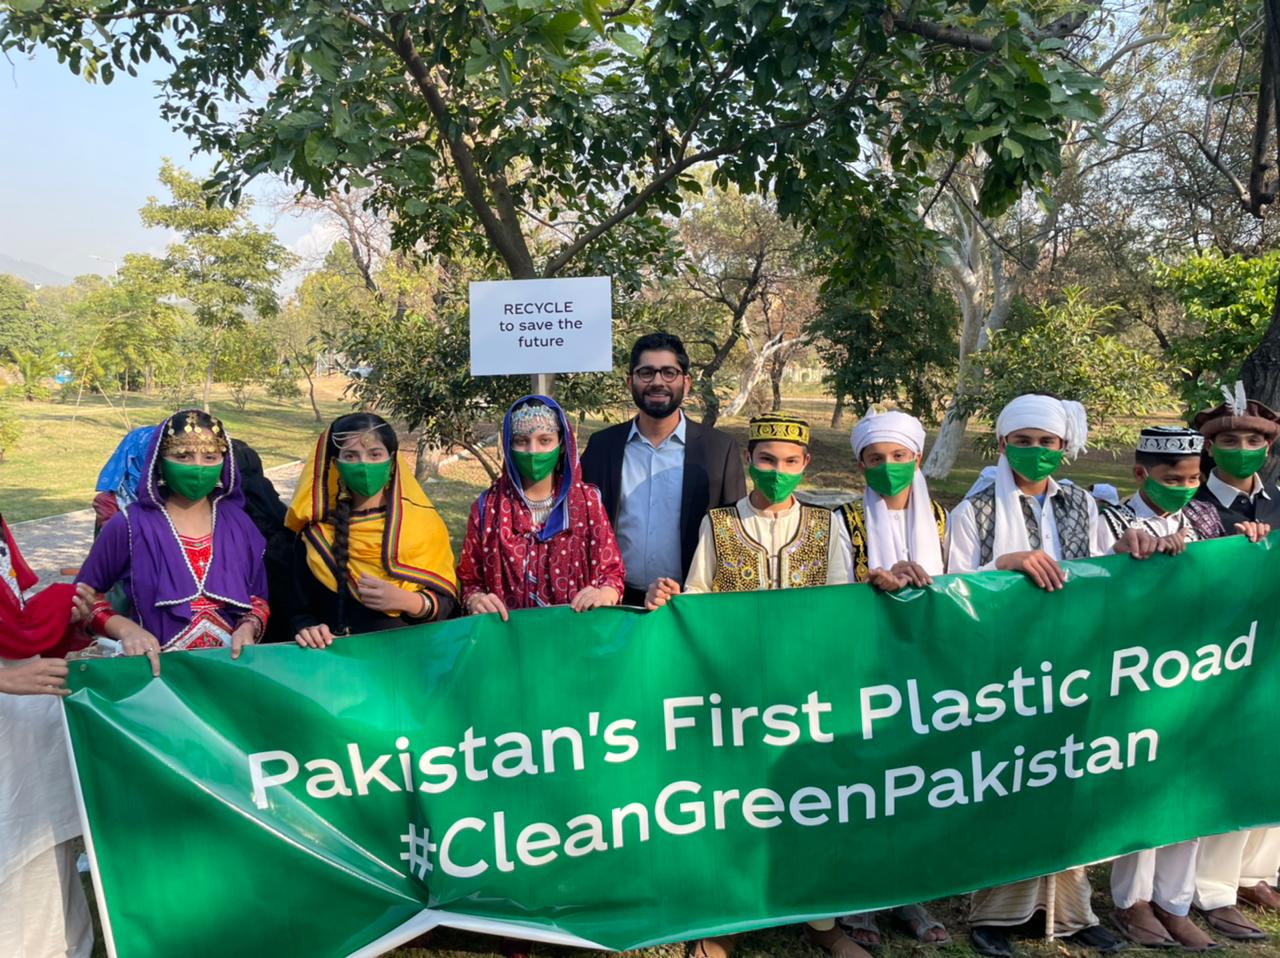 A group of people hold a banner with the phrase 'Pakistan's First Plastic Road #CleanGreenPakistan'